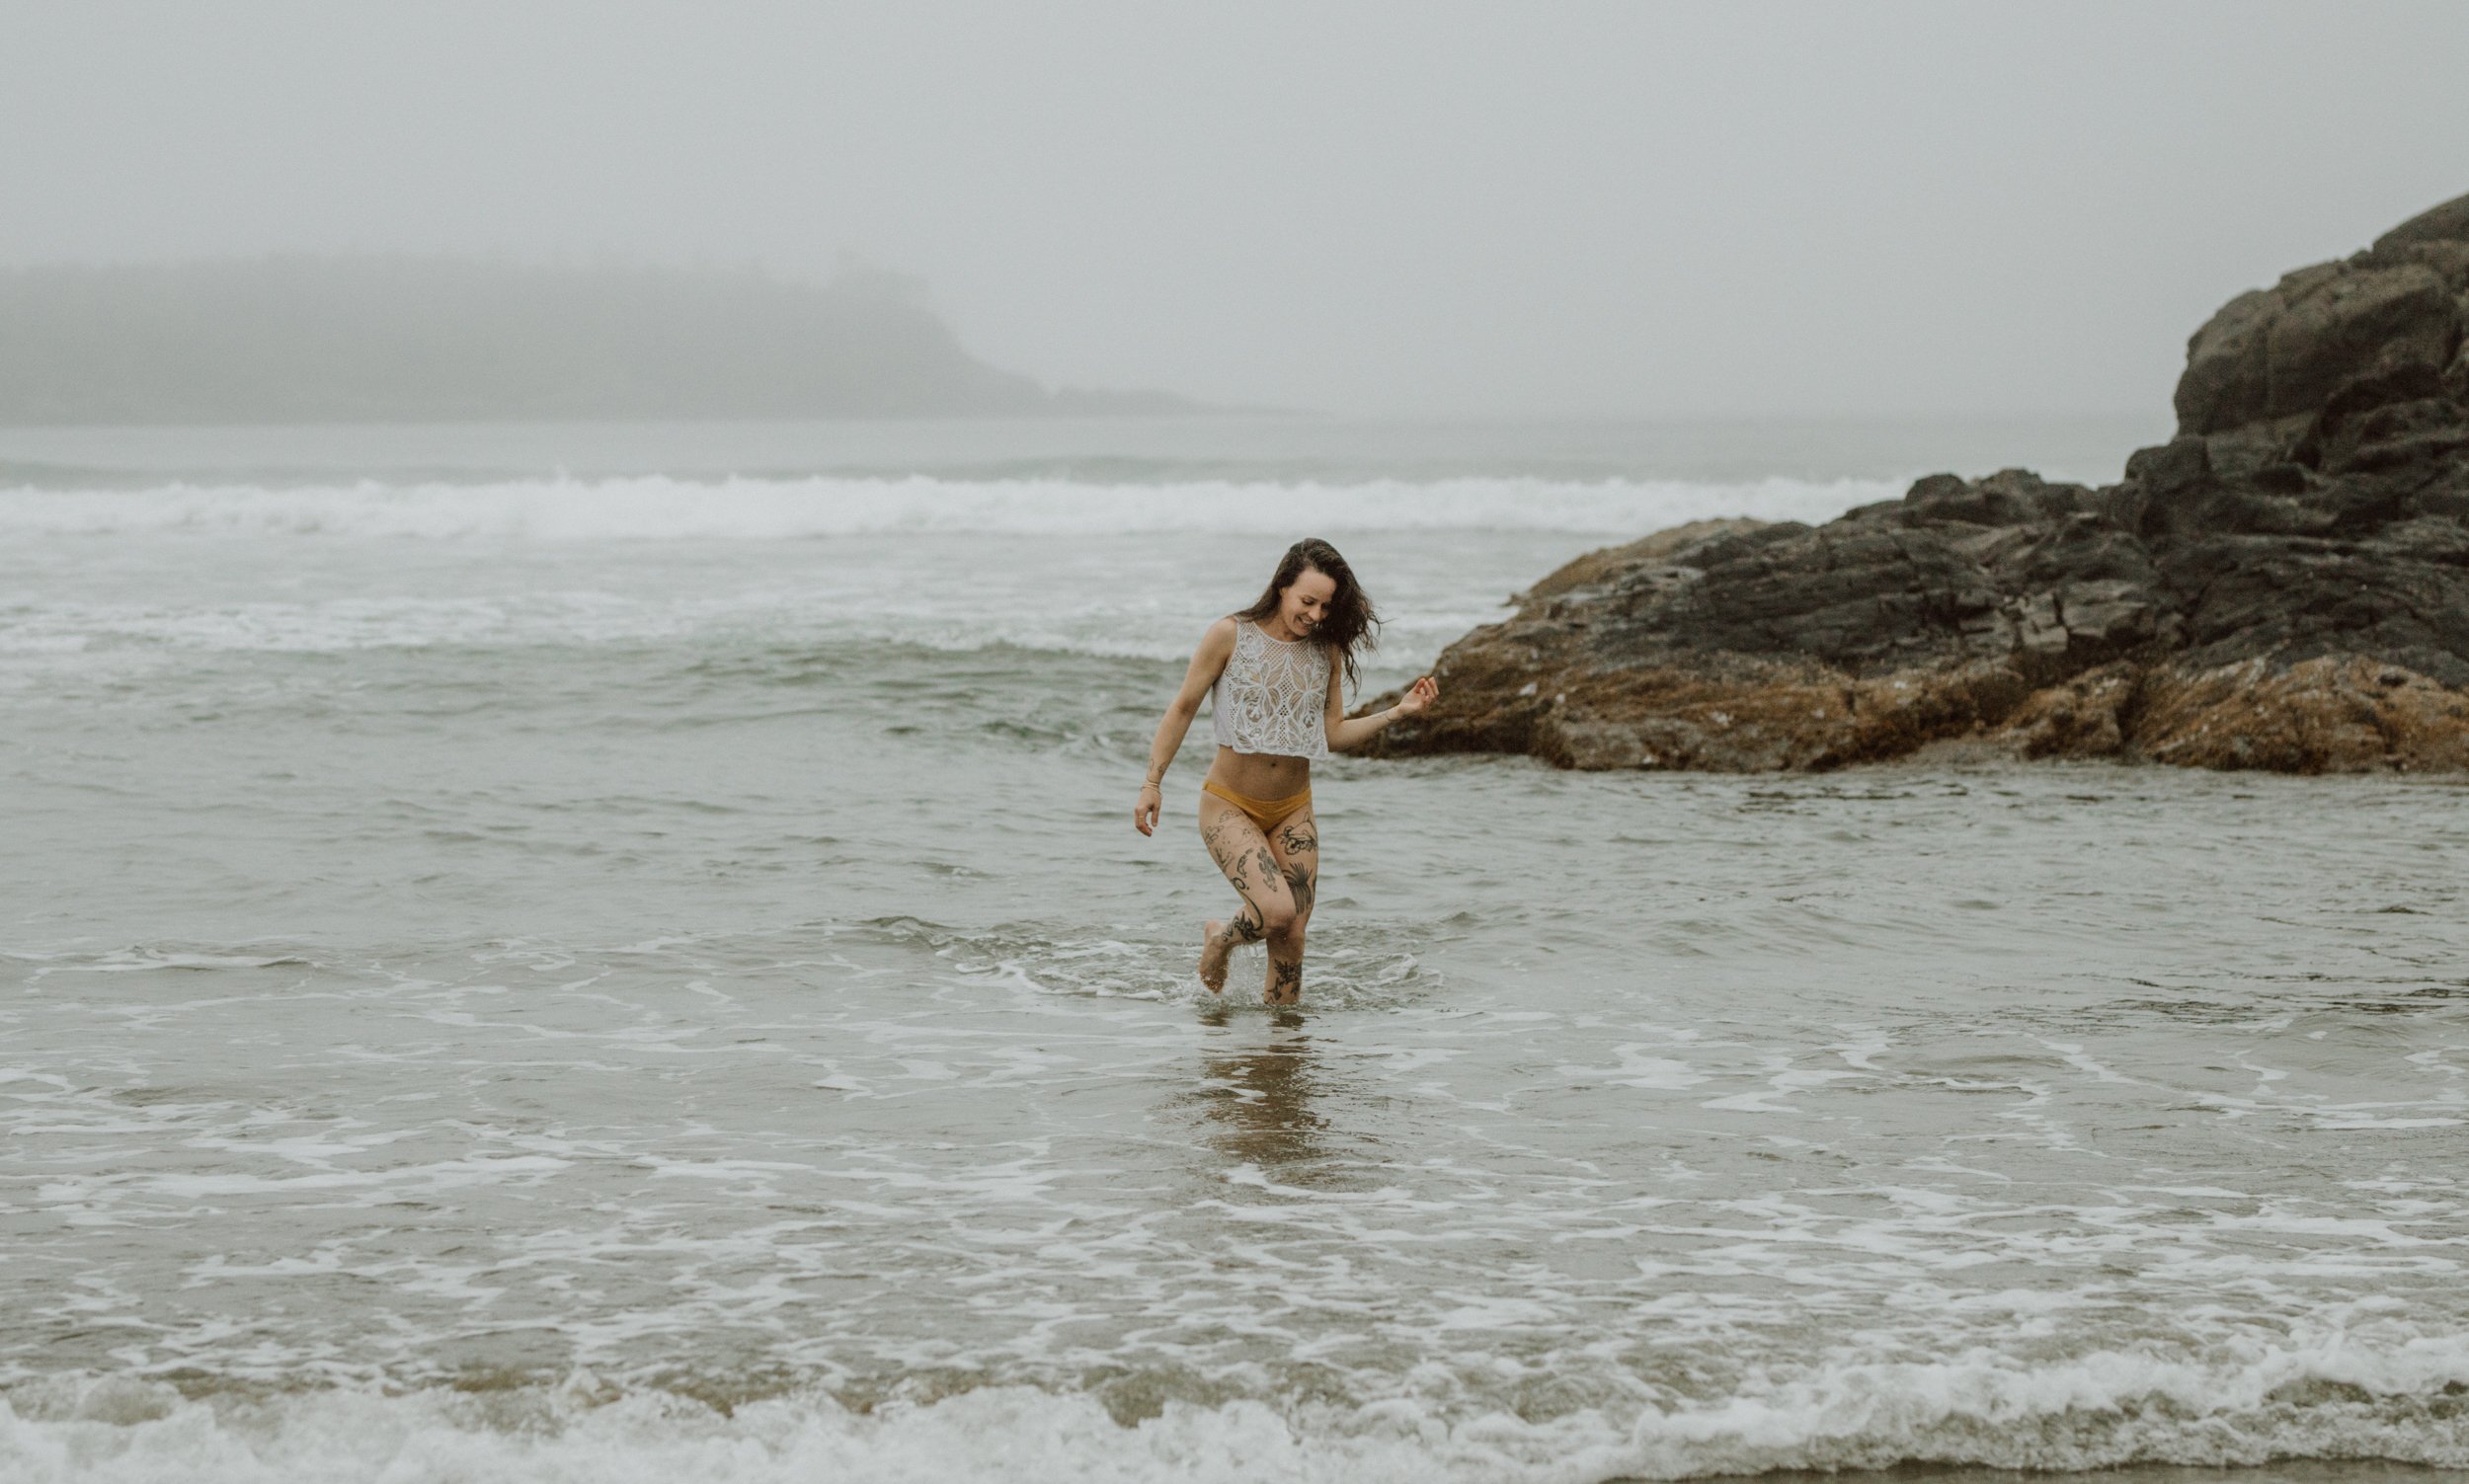  Surfer Emily Ballard walking in the ocean at the pacific Sands Tofino B.C. 